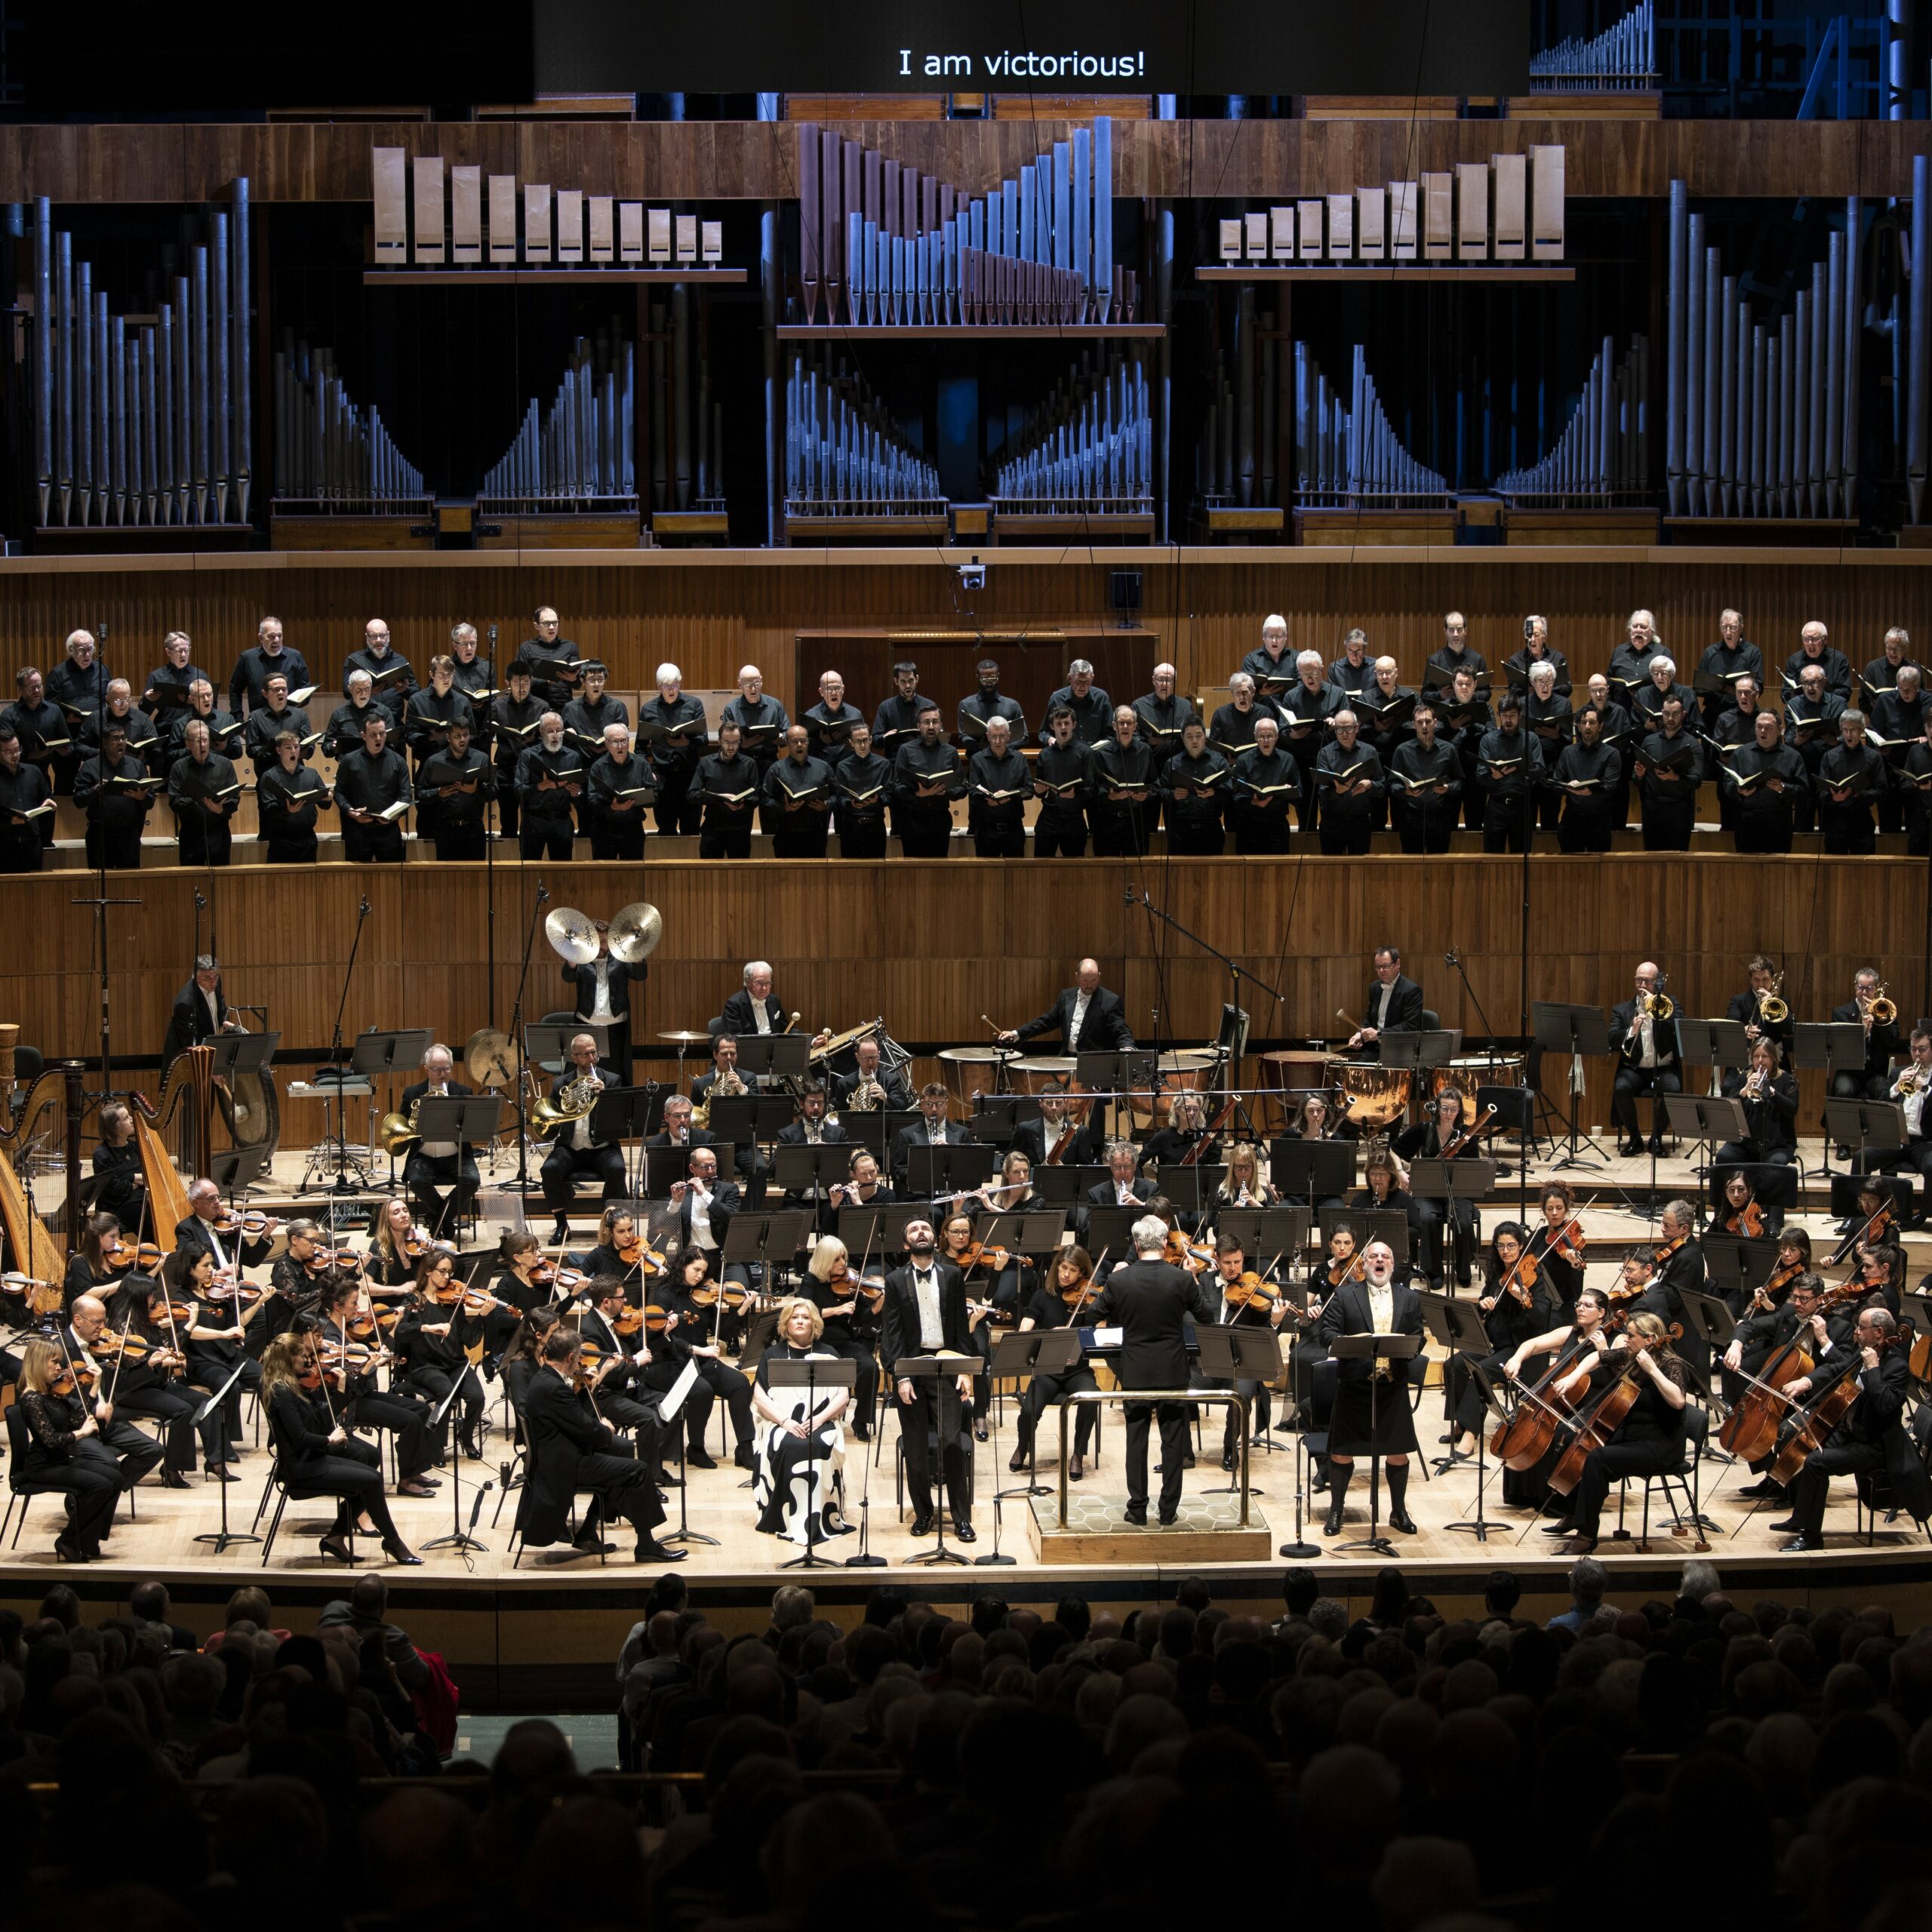 A choir, orchestra, soloists and conductor on stage at the Royal Festival Hall, wearing black.